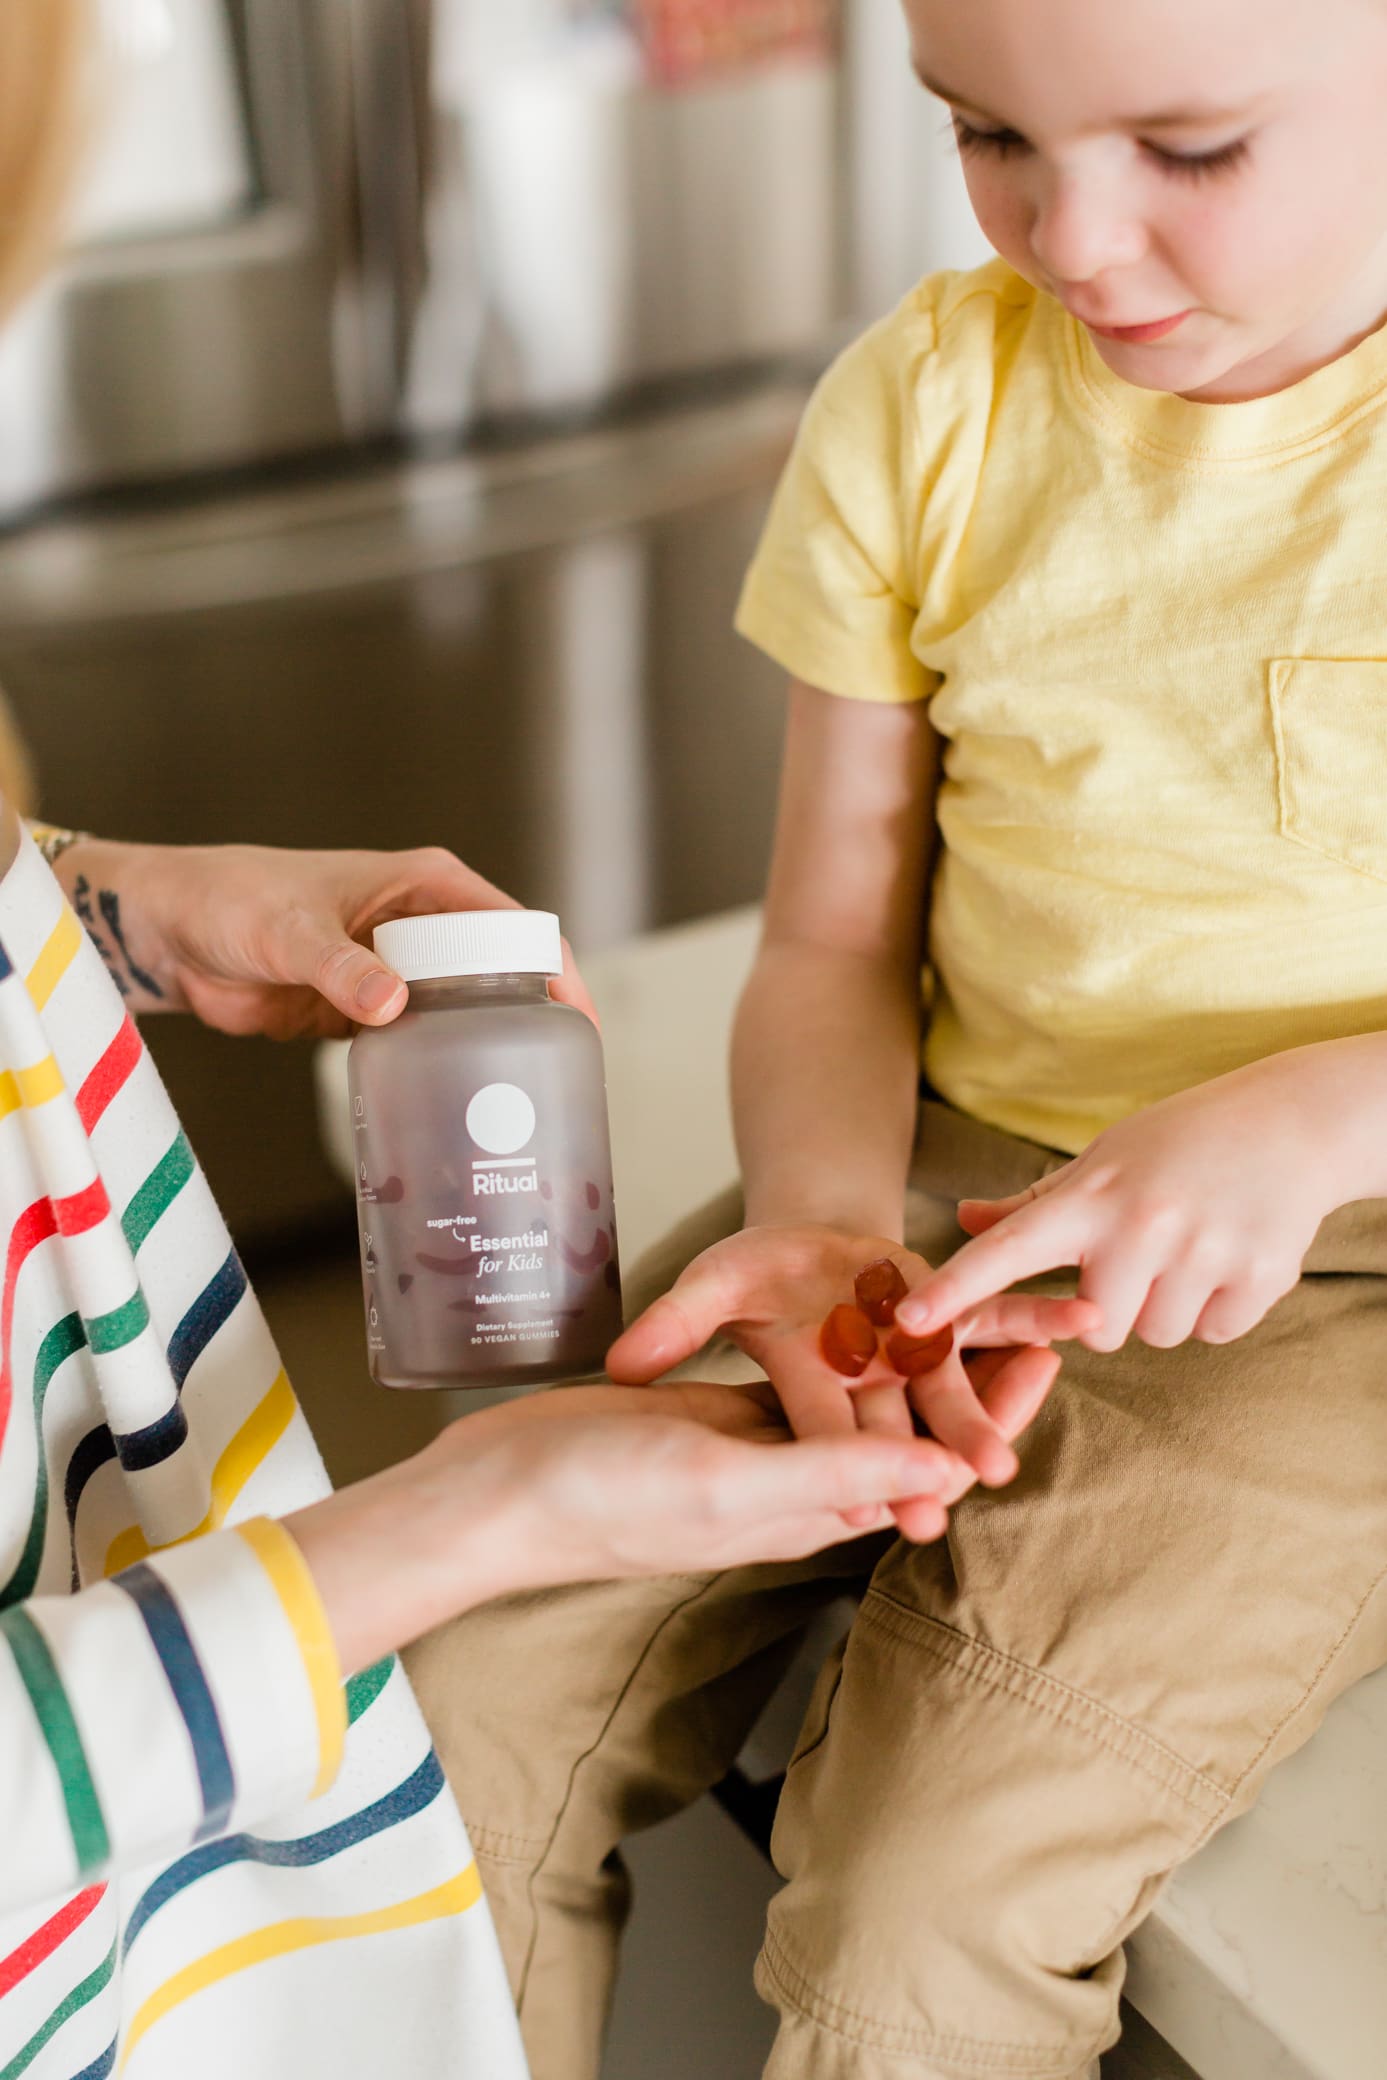 The Multivitamin My Kid Asks For Every Day—Ritual Essential for Kids Multivitamin